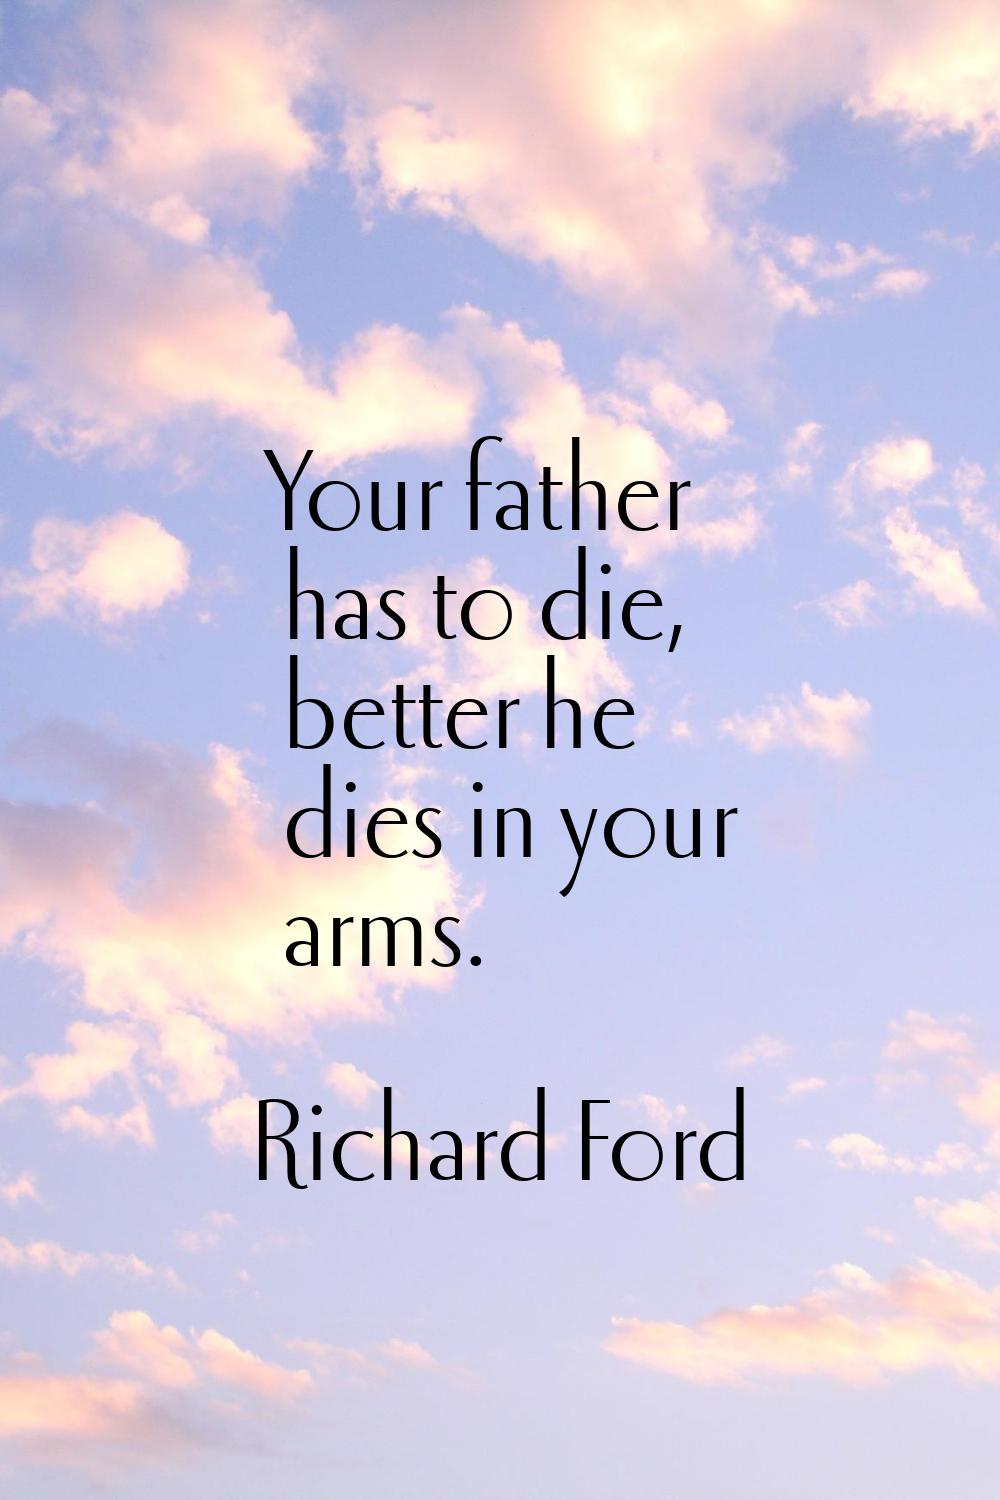 Your father has to die, better he dies in your arms.